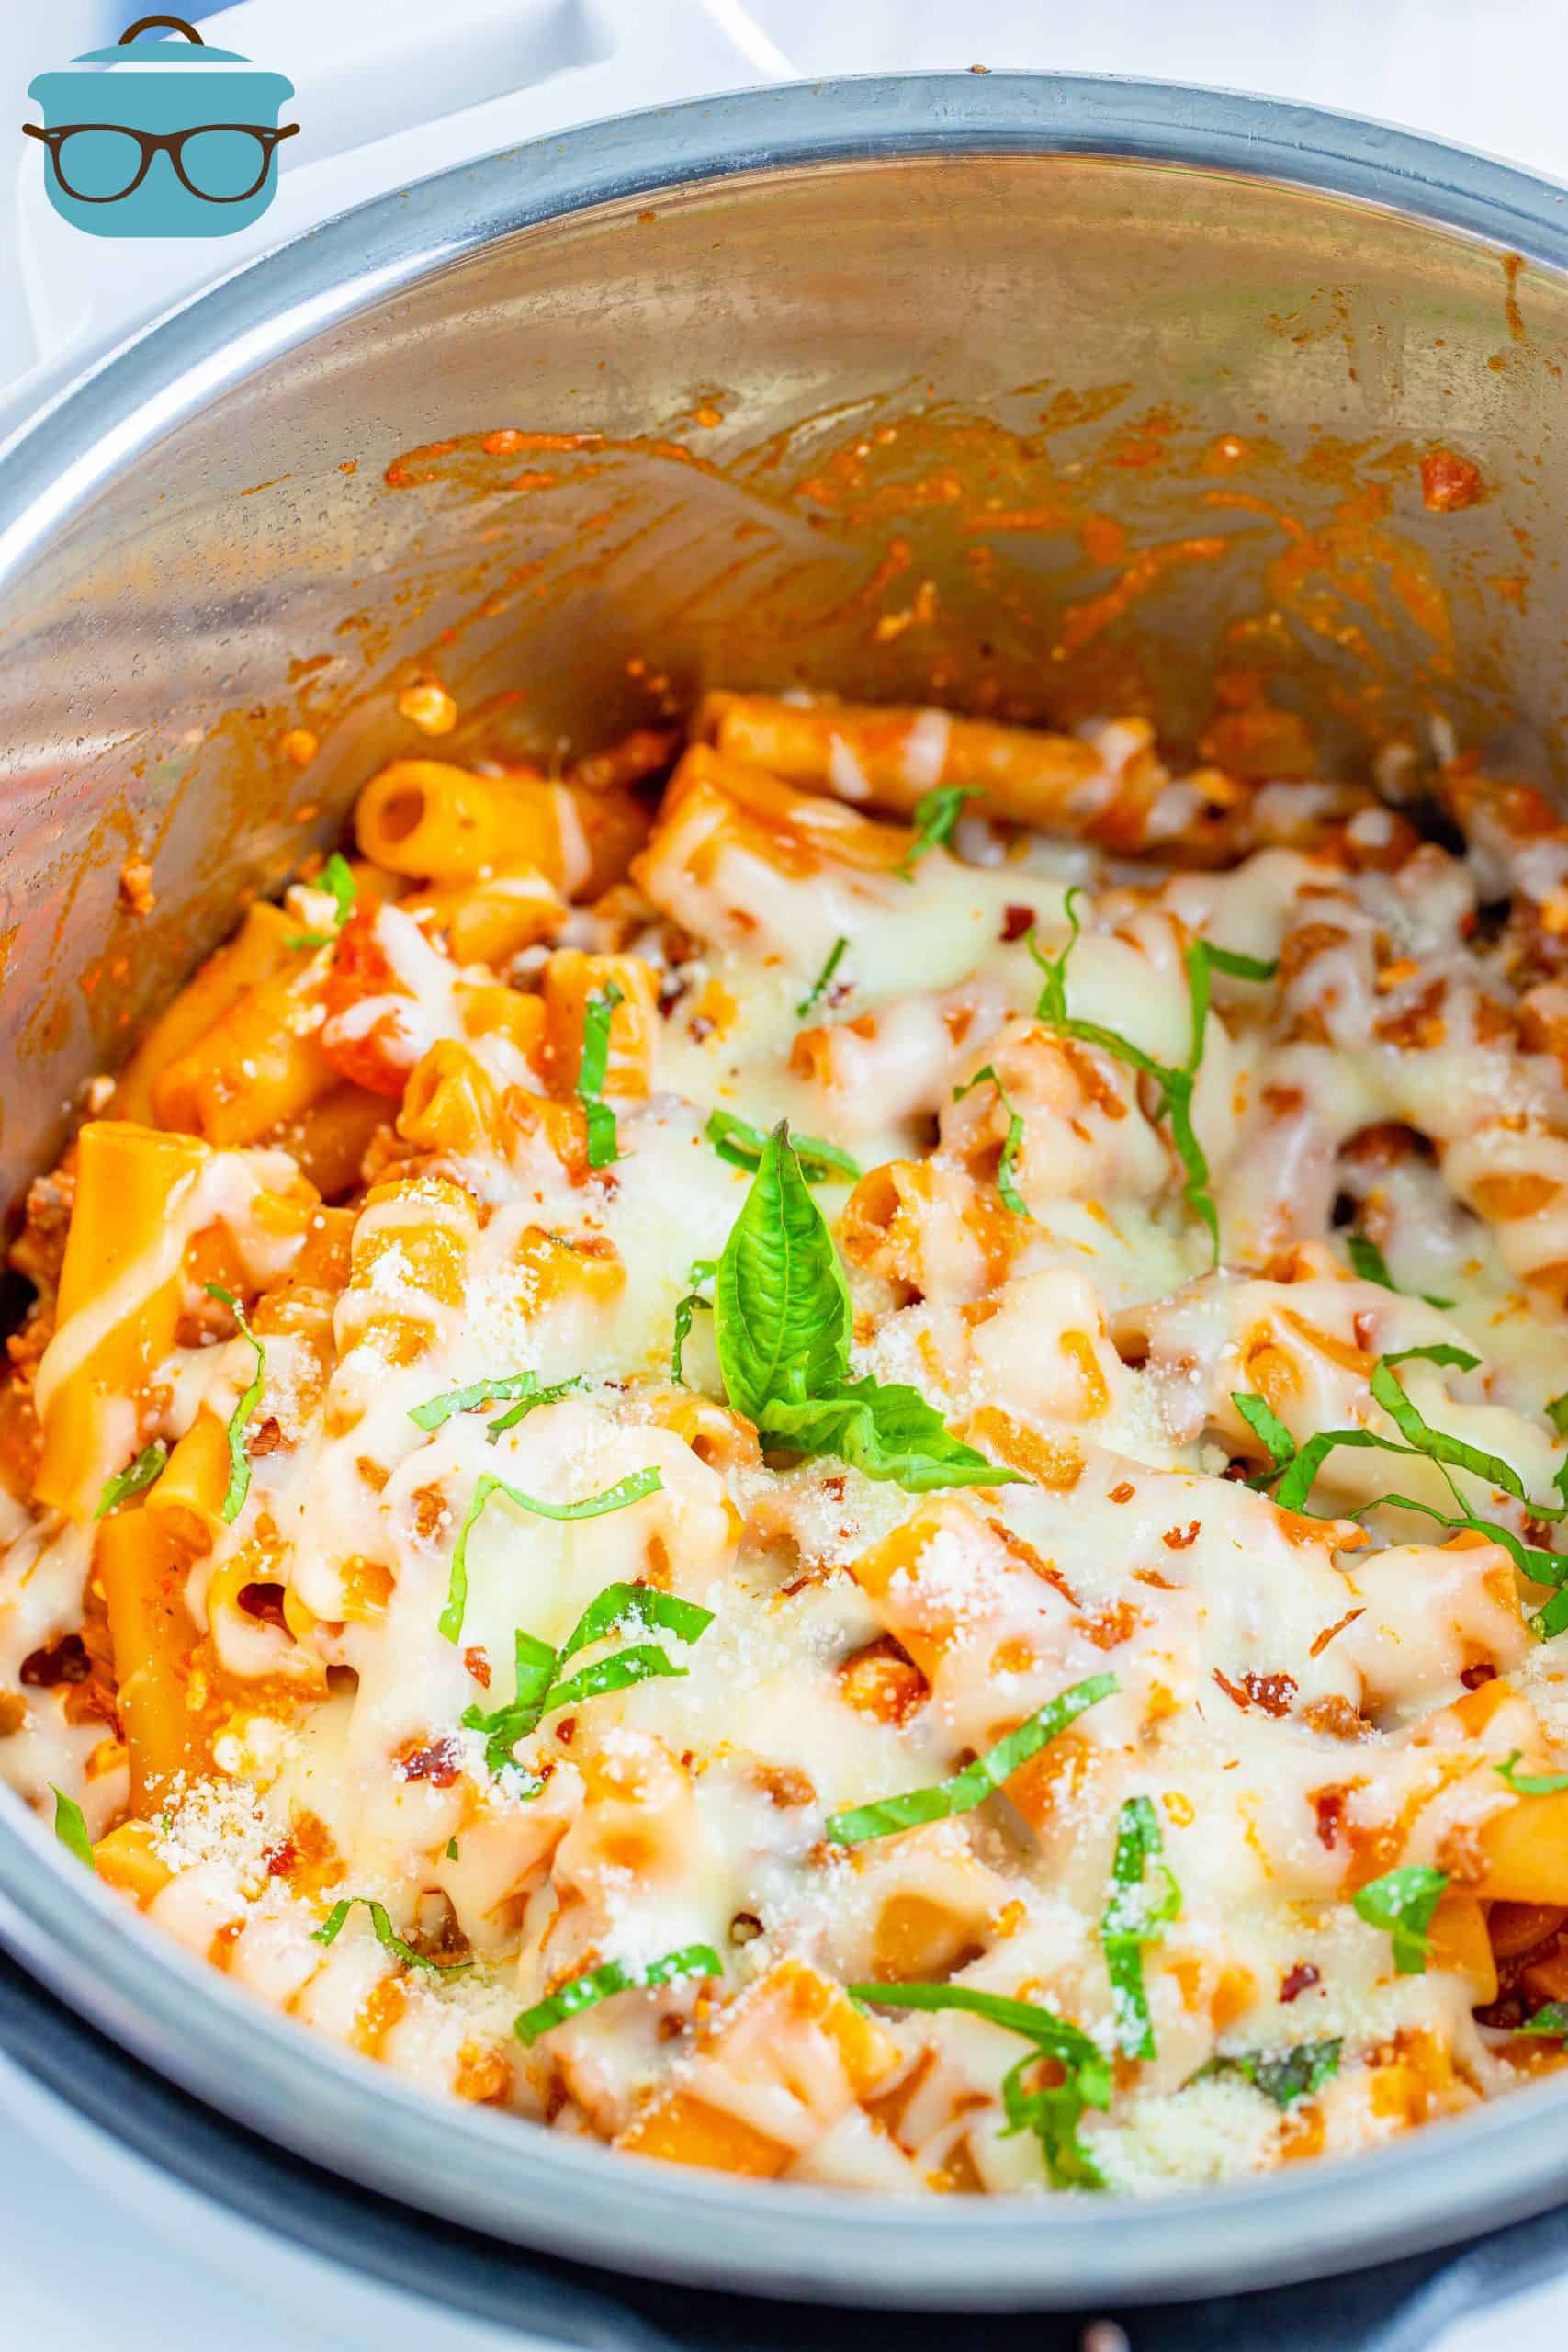 Instant Pot Baked Ziti, fully cooked with melted mozzarella on top.